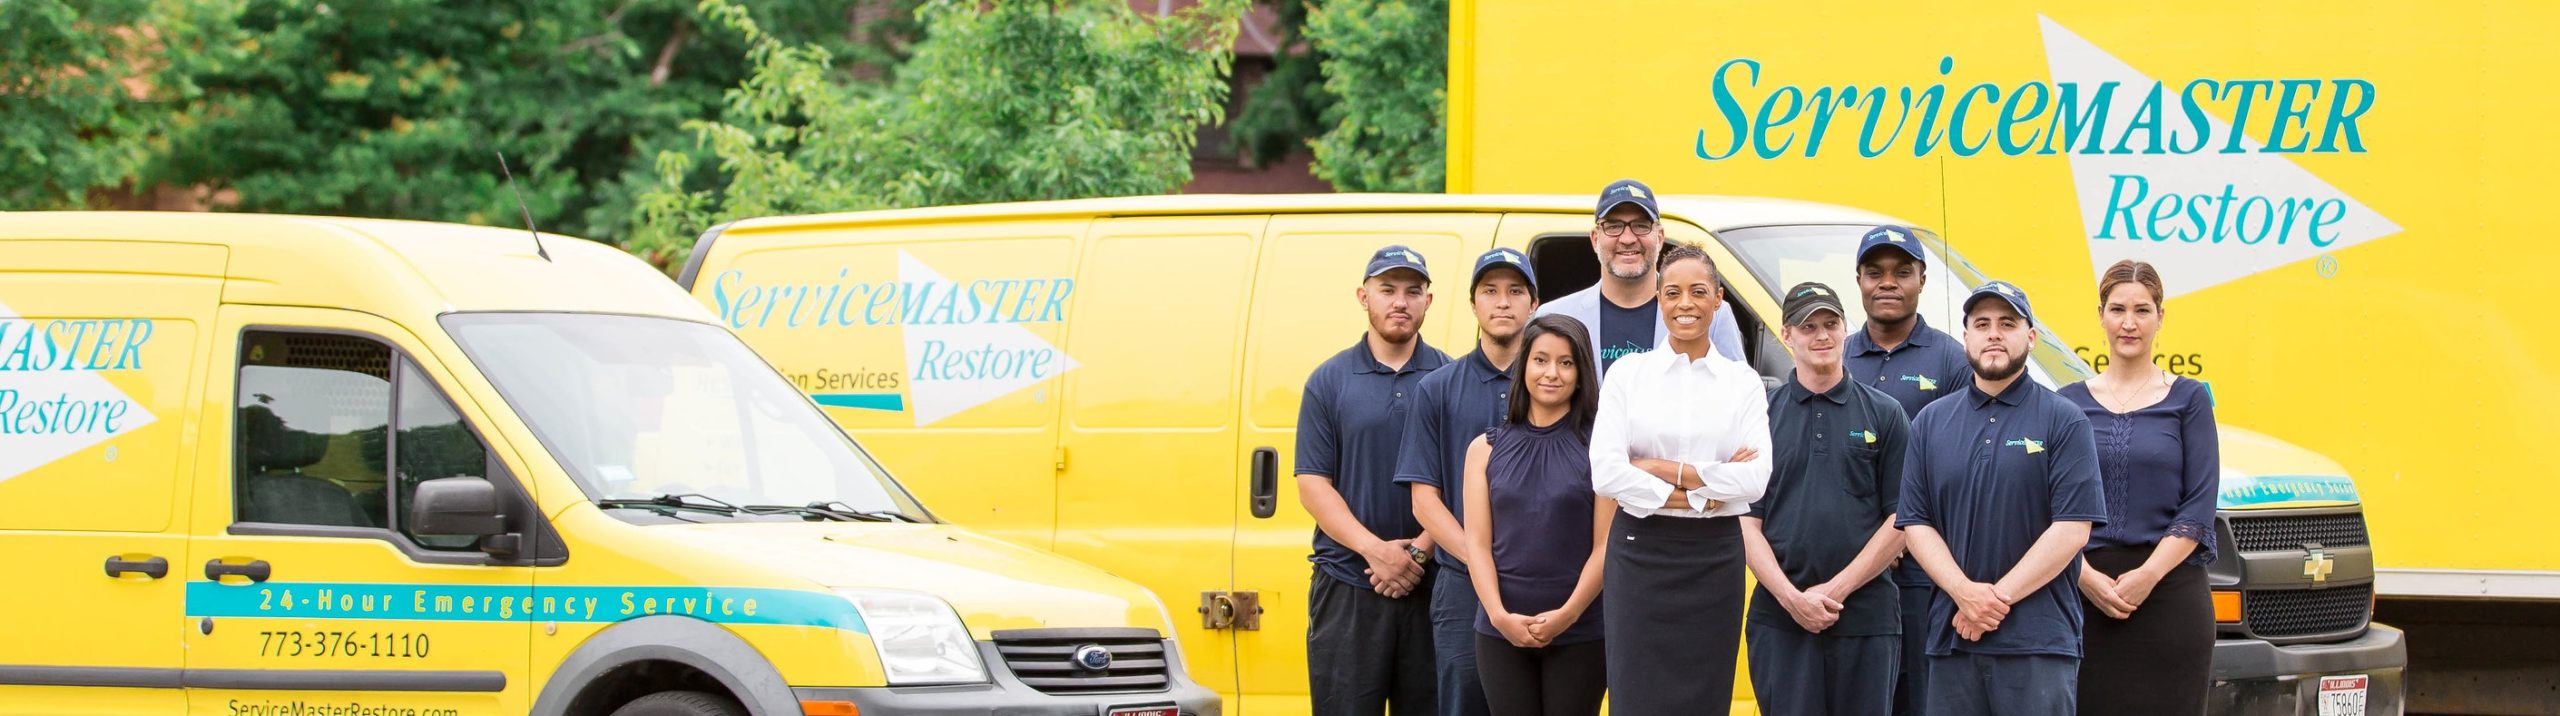 Servicemaster Chicago  - fire damage cleanup - water damage cleanup - sewage cleanup - fire damage restoration - water damage restoration - flood damage cleanup - post construction cleaning - servicemaster near me 